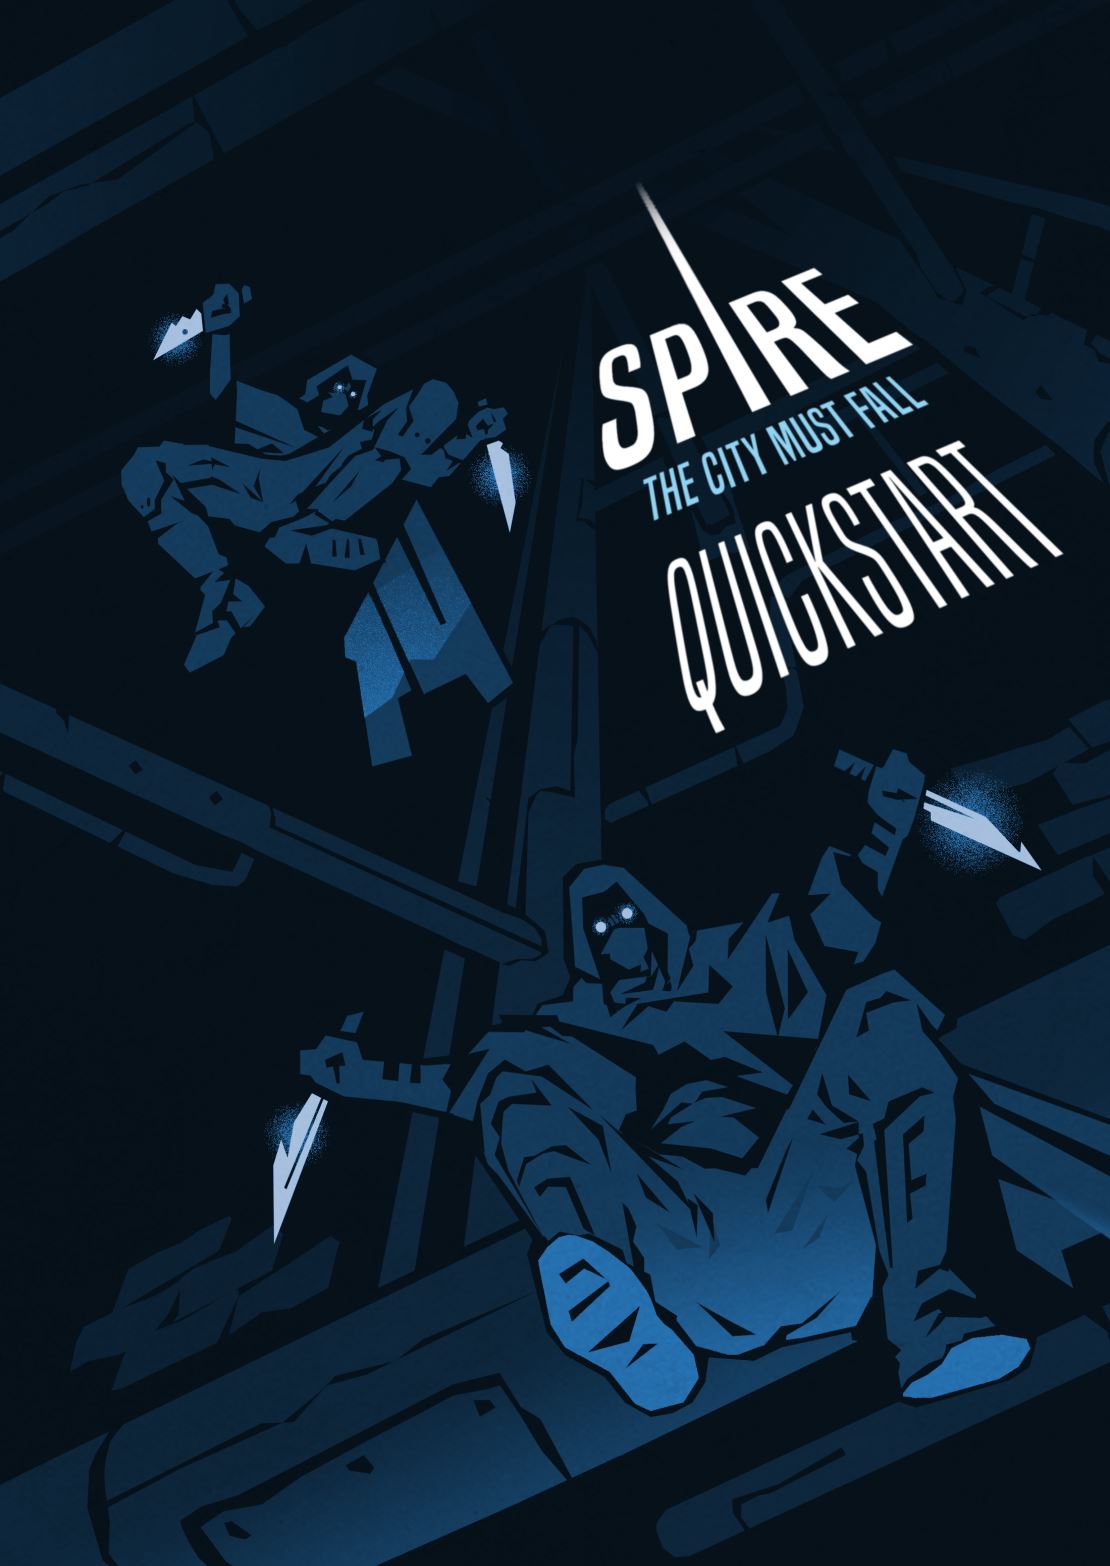 Grant Howitt, Christopher Taylor: Spire The City Must Fall: Quickstart (Paperback, 2020, Rowan Rook and Decard)